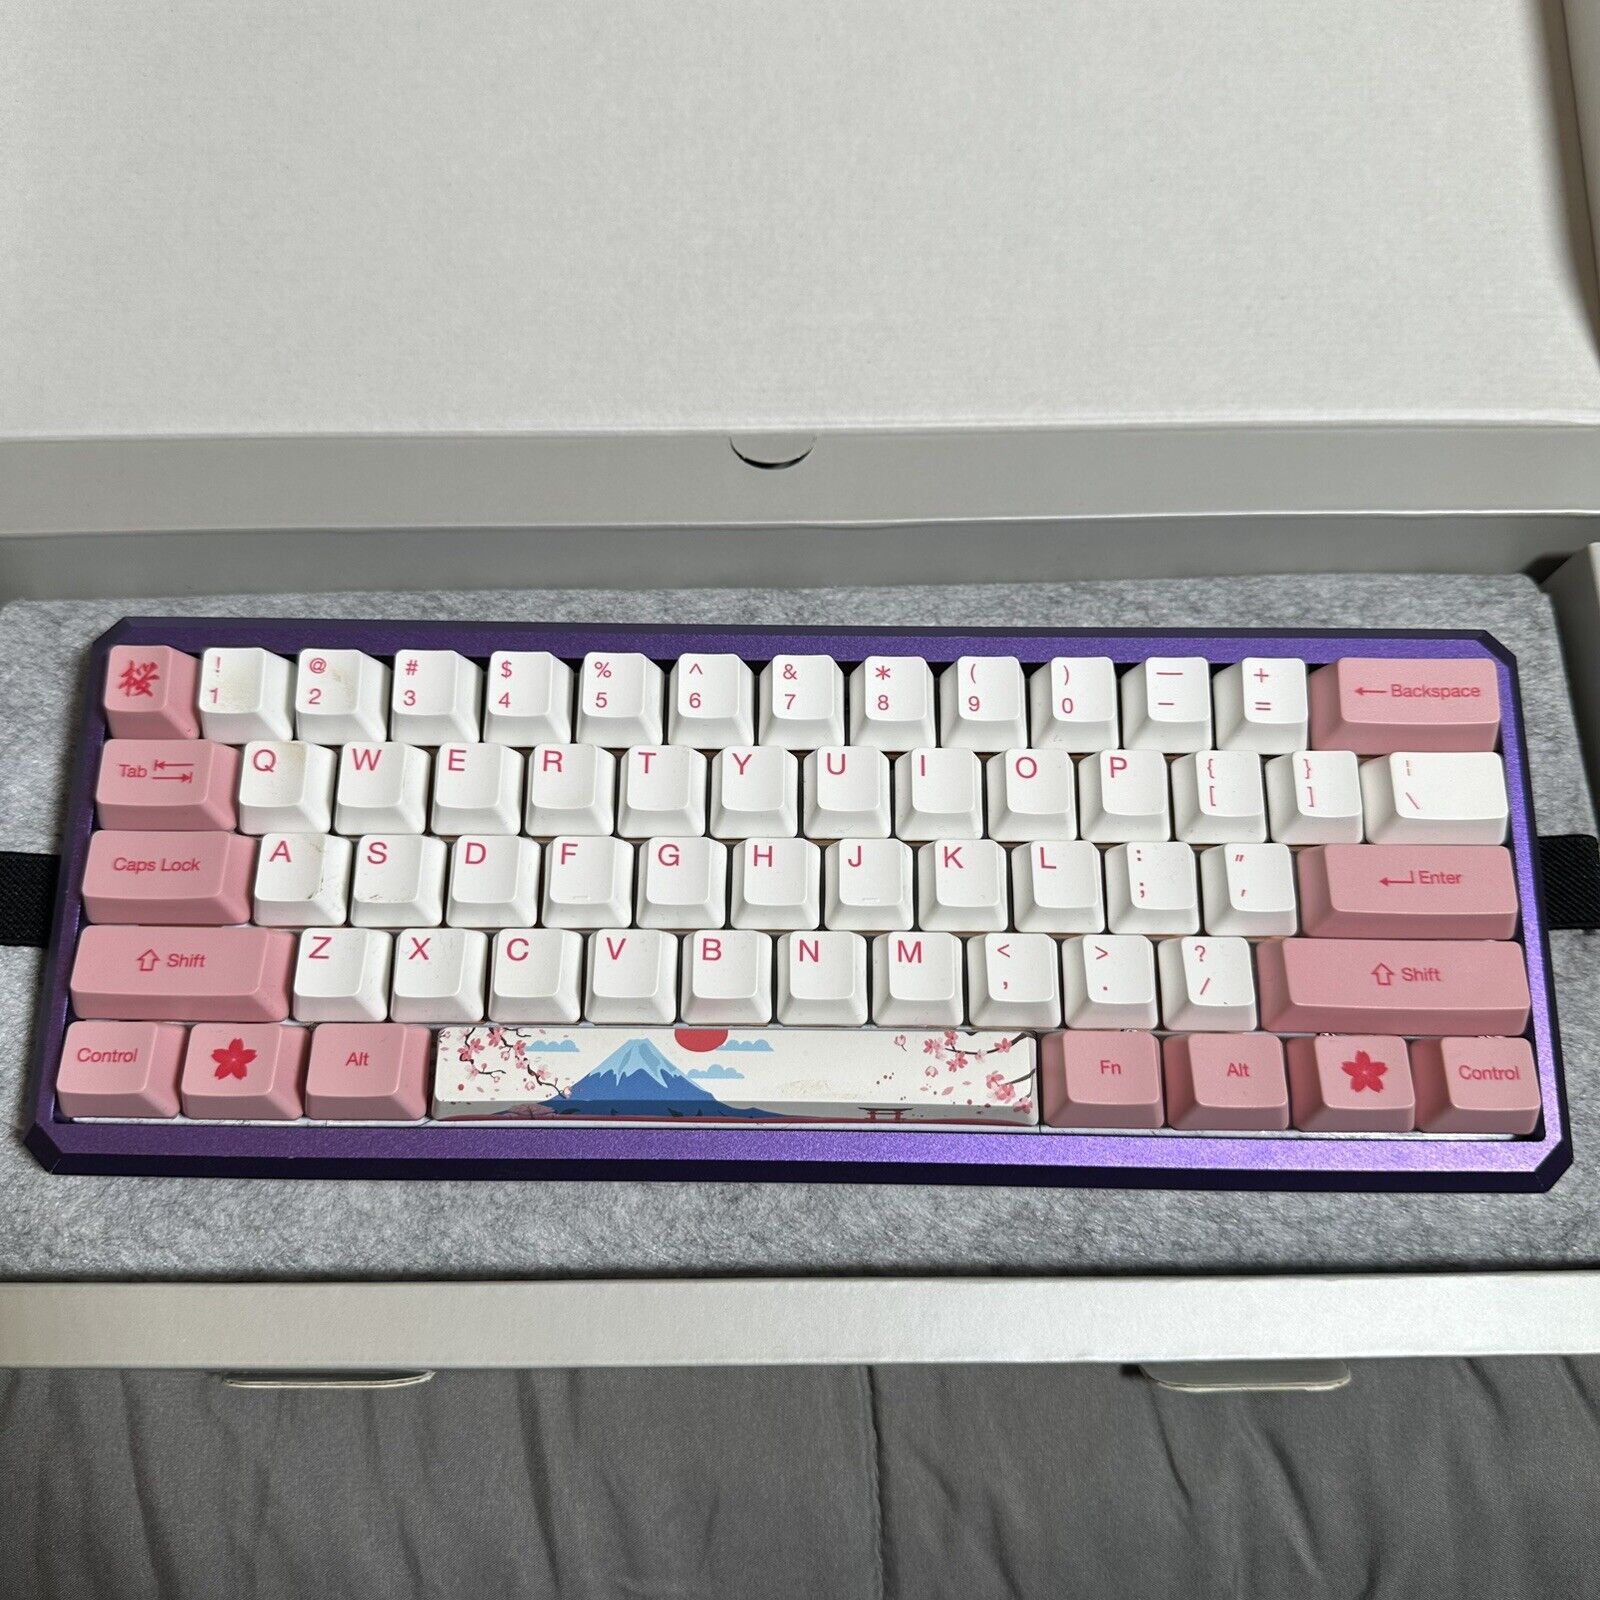 Skyloong GK61Xs CNC Aluminum Case Clicky Switch